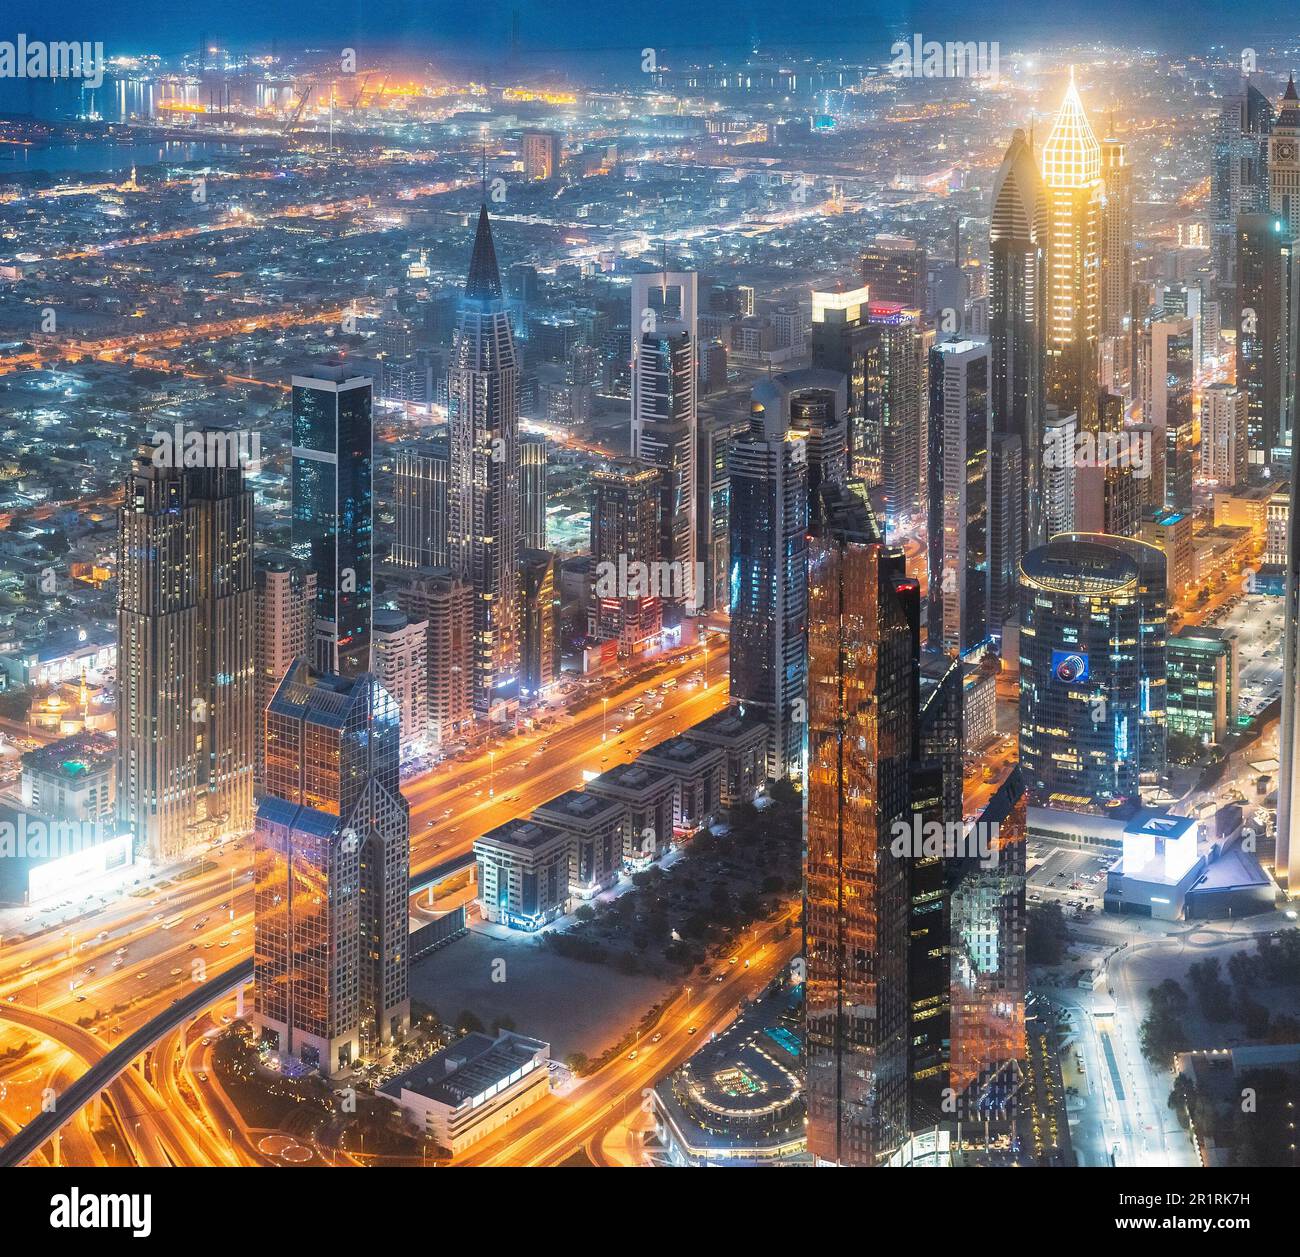 Aerial View Of Urban Background Of Illuminated Cityscape With Skyscrapers In Dubai. Street Night Traffic In Dudai Skyline. Moving through modern city Stock Photo